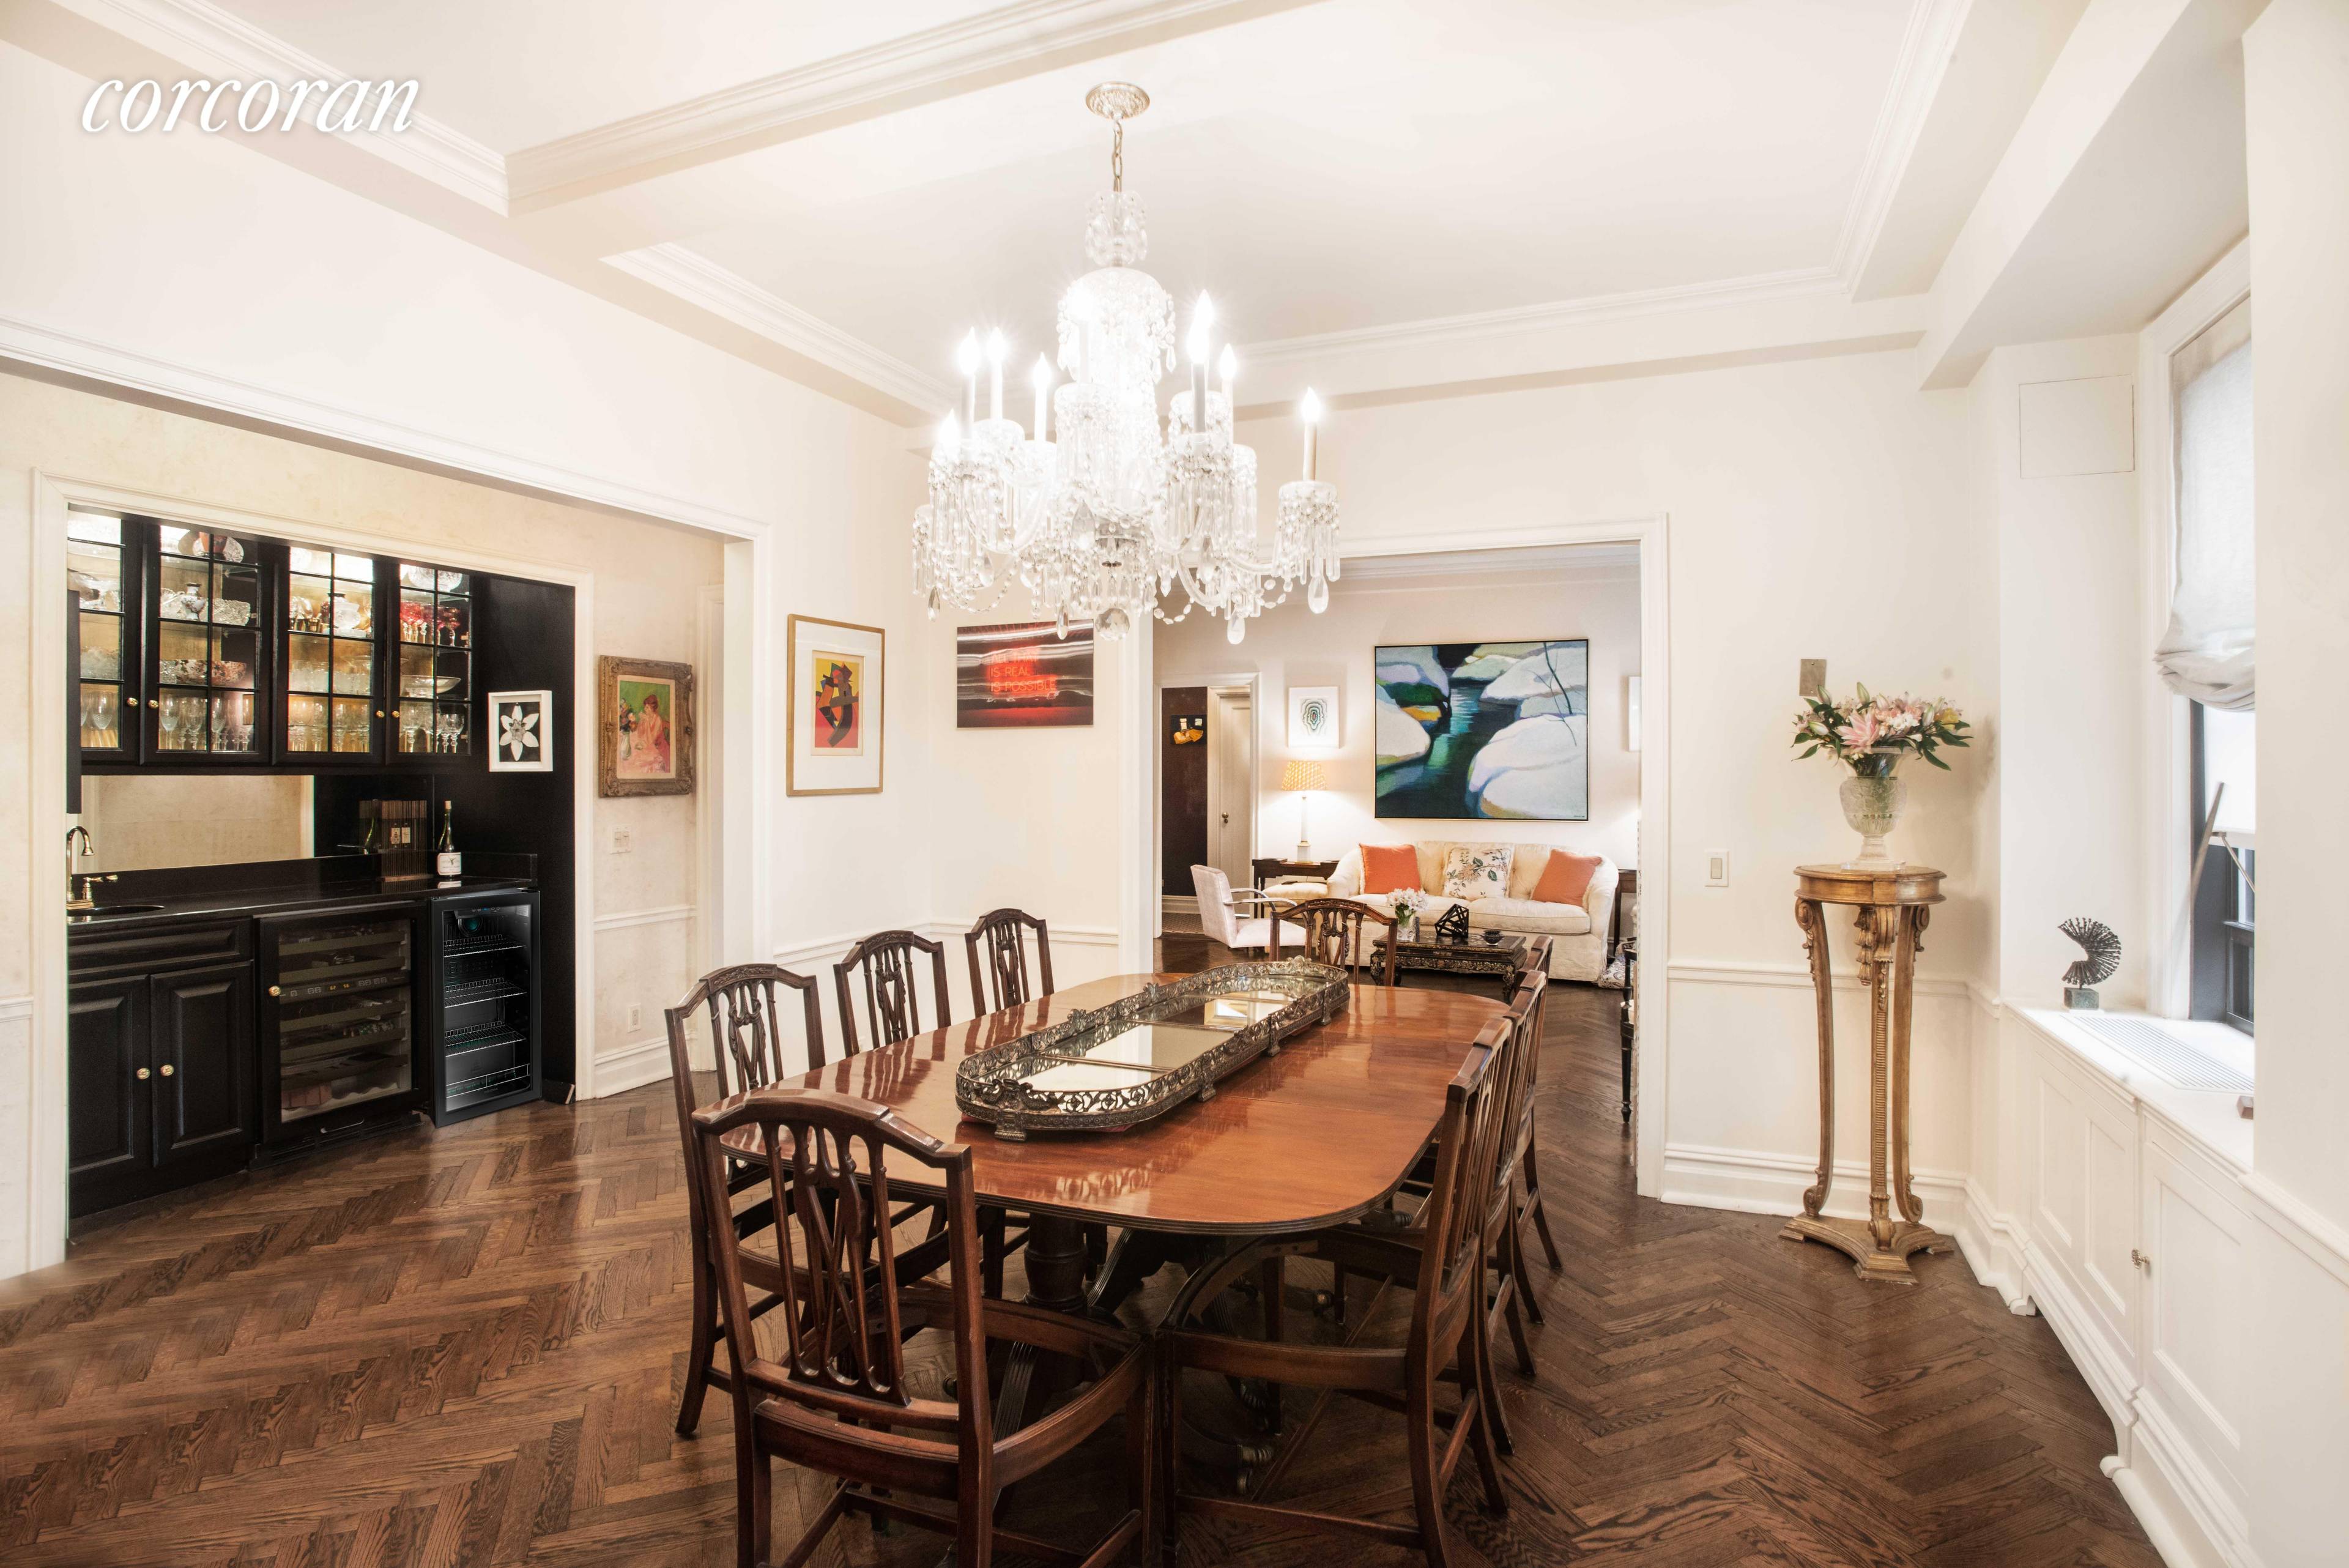 Newly Listed ! Sophisticated 6 Room residence in one of Fifth AvenueA s most desirable building across from the Metropolitan Museum and Central Park.